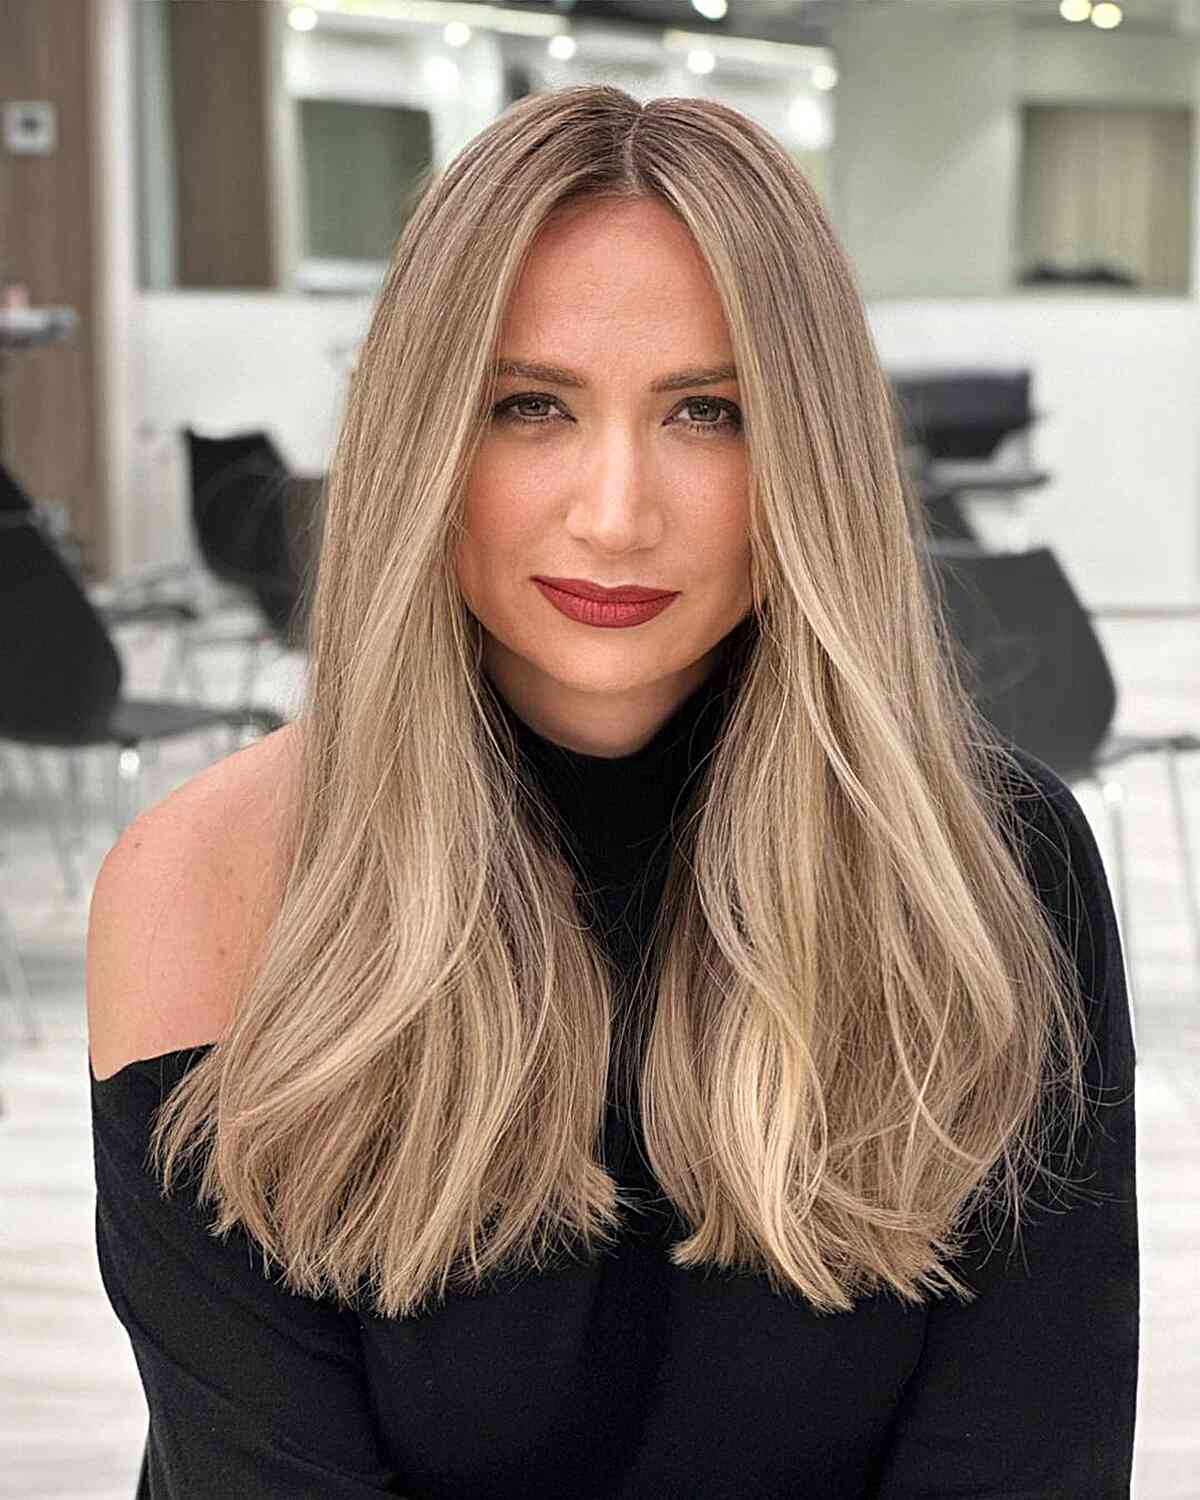 Long Blunt Blonde Balayage with a Center Part for Women with long blonde hair